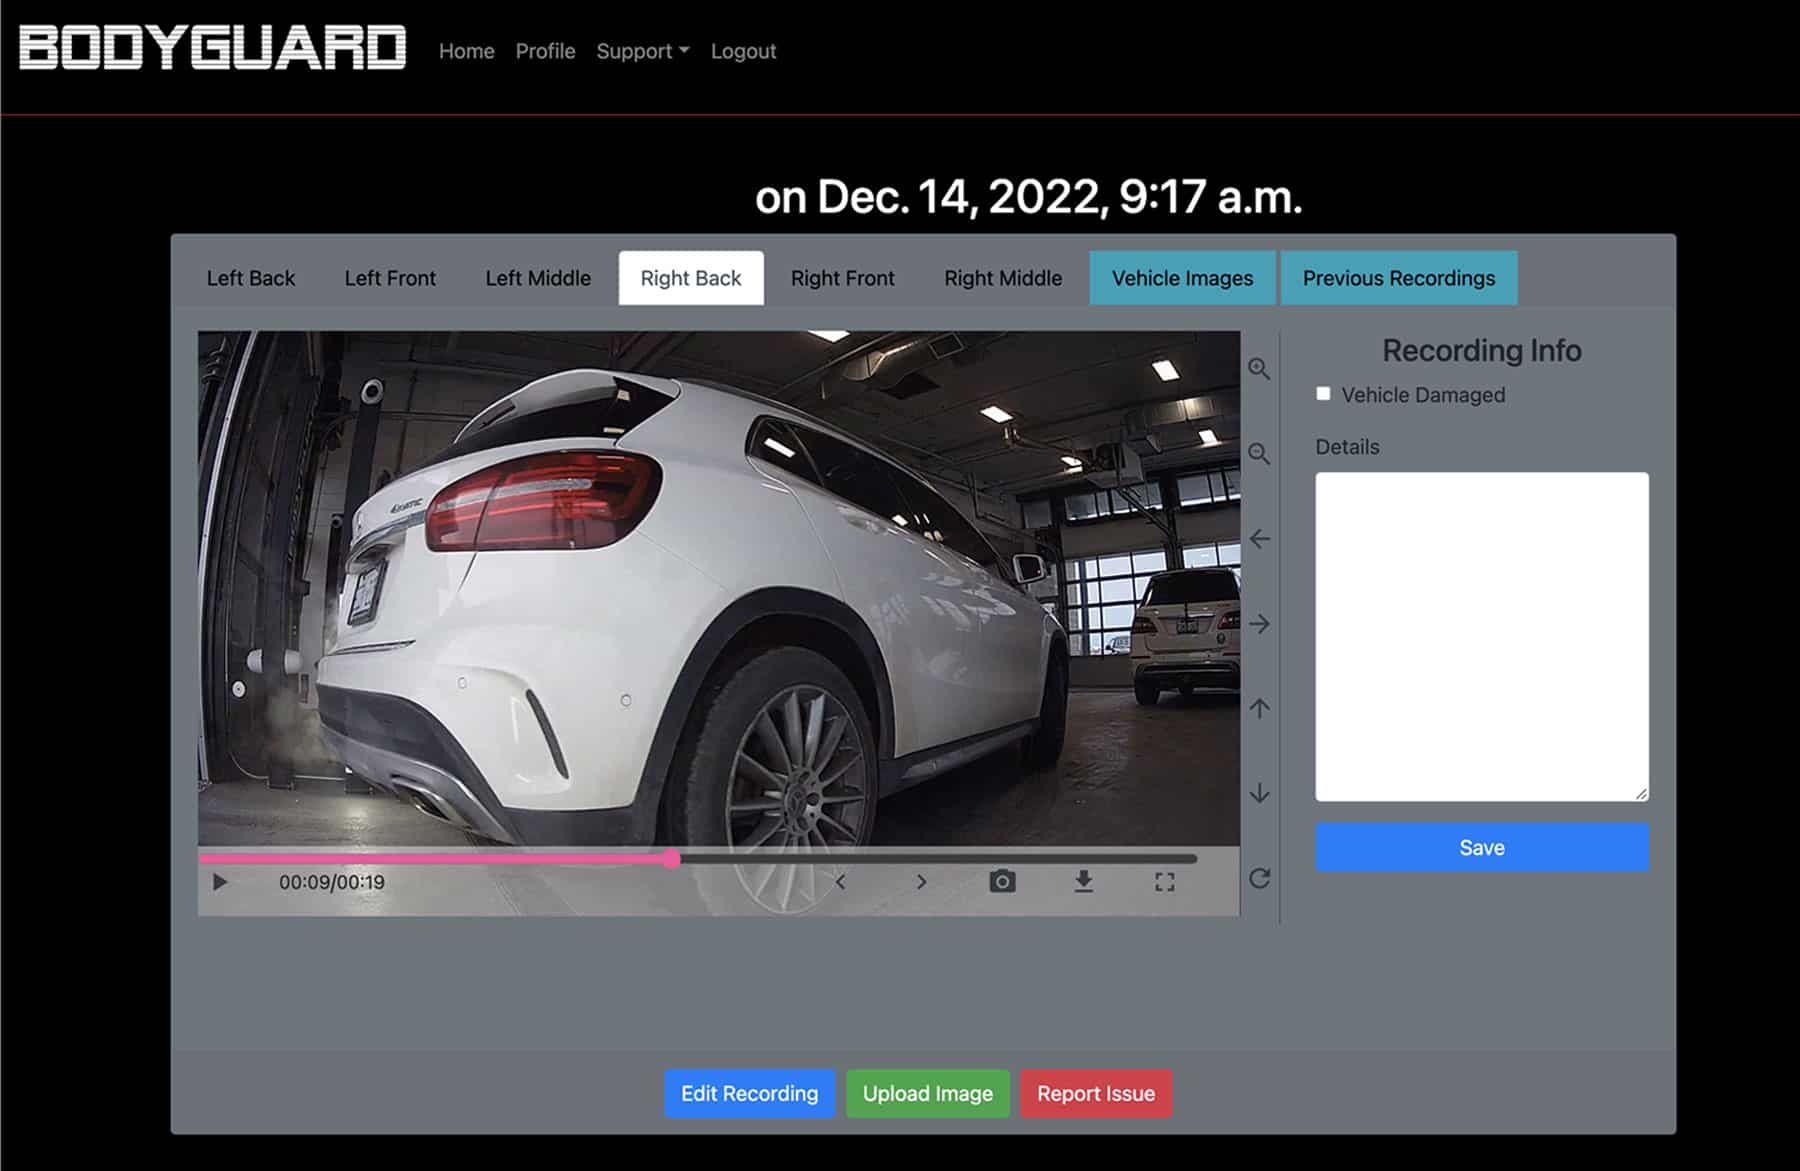 A desktop view of the Bodyguard interface shows a live feed of a white mercedez benz that pulled into a dealership service bay